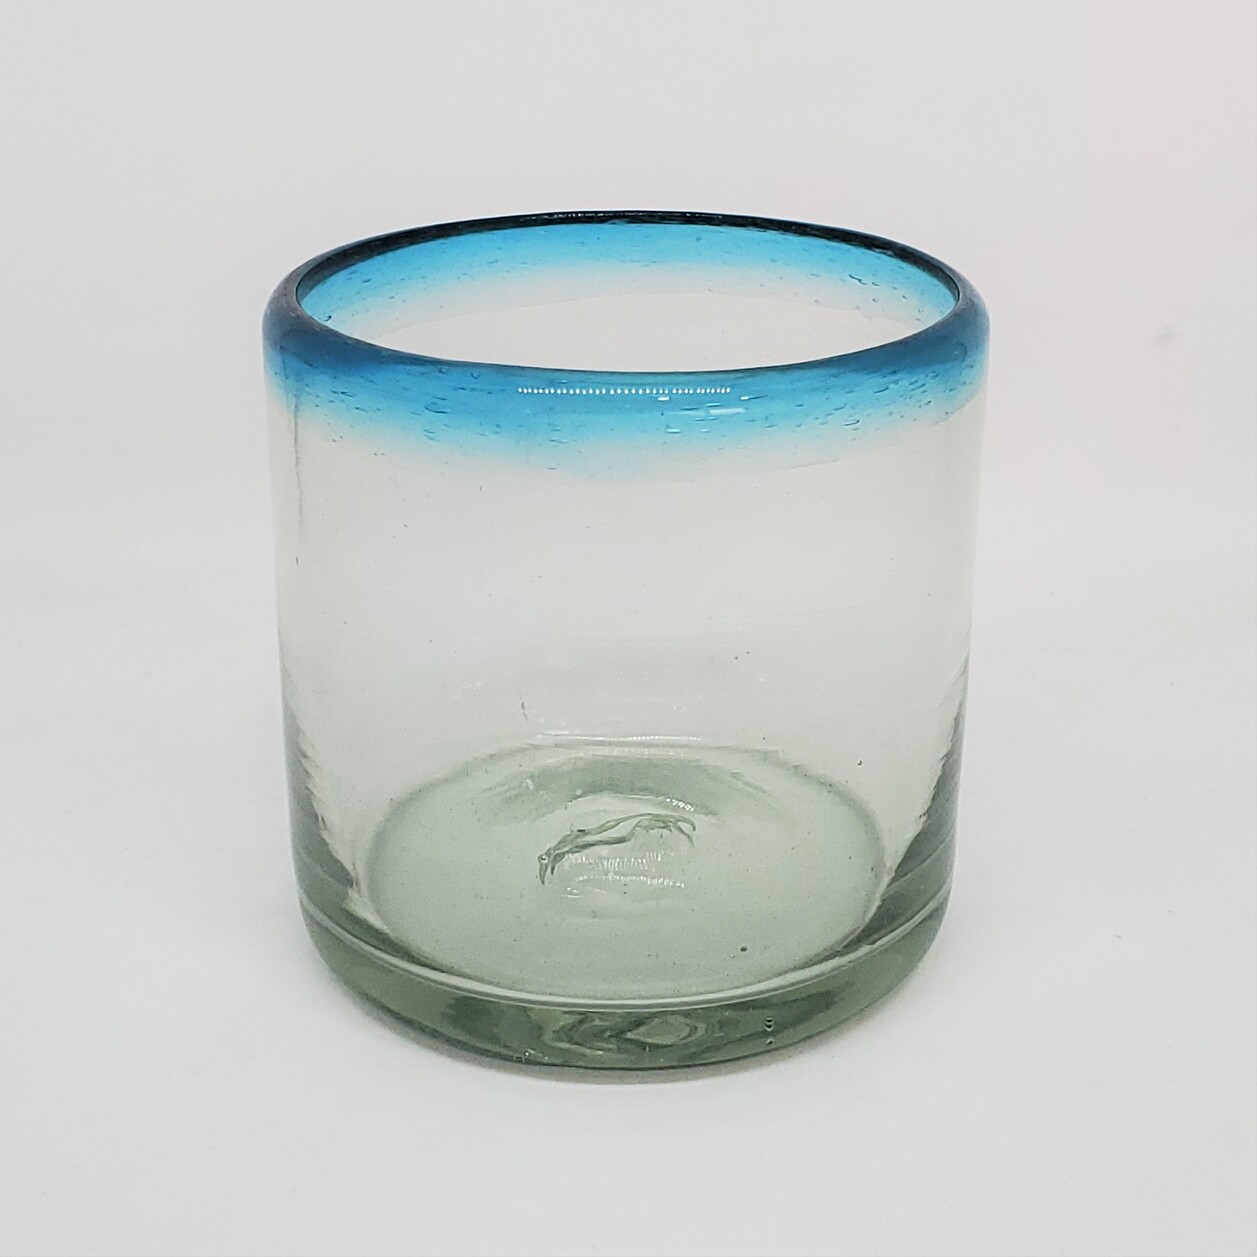 Wholesale Colored Rim Glassware / Aqua Blue Rim 8 oz DOF Rock Glasses  / These glasses are just the right size to enjoy fresh squeezed fruit juice in the moning.